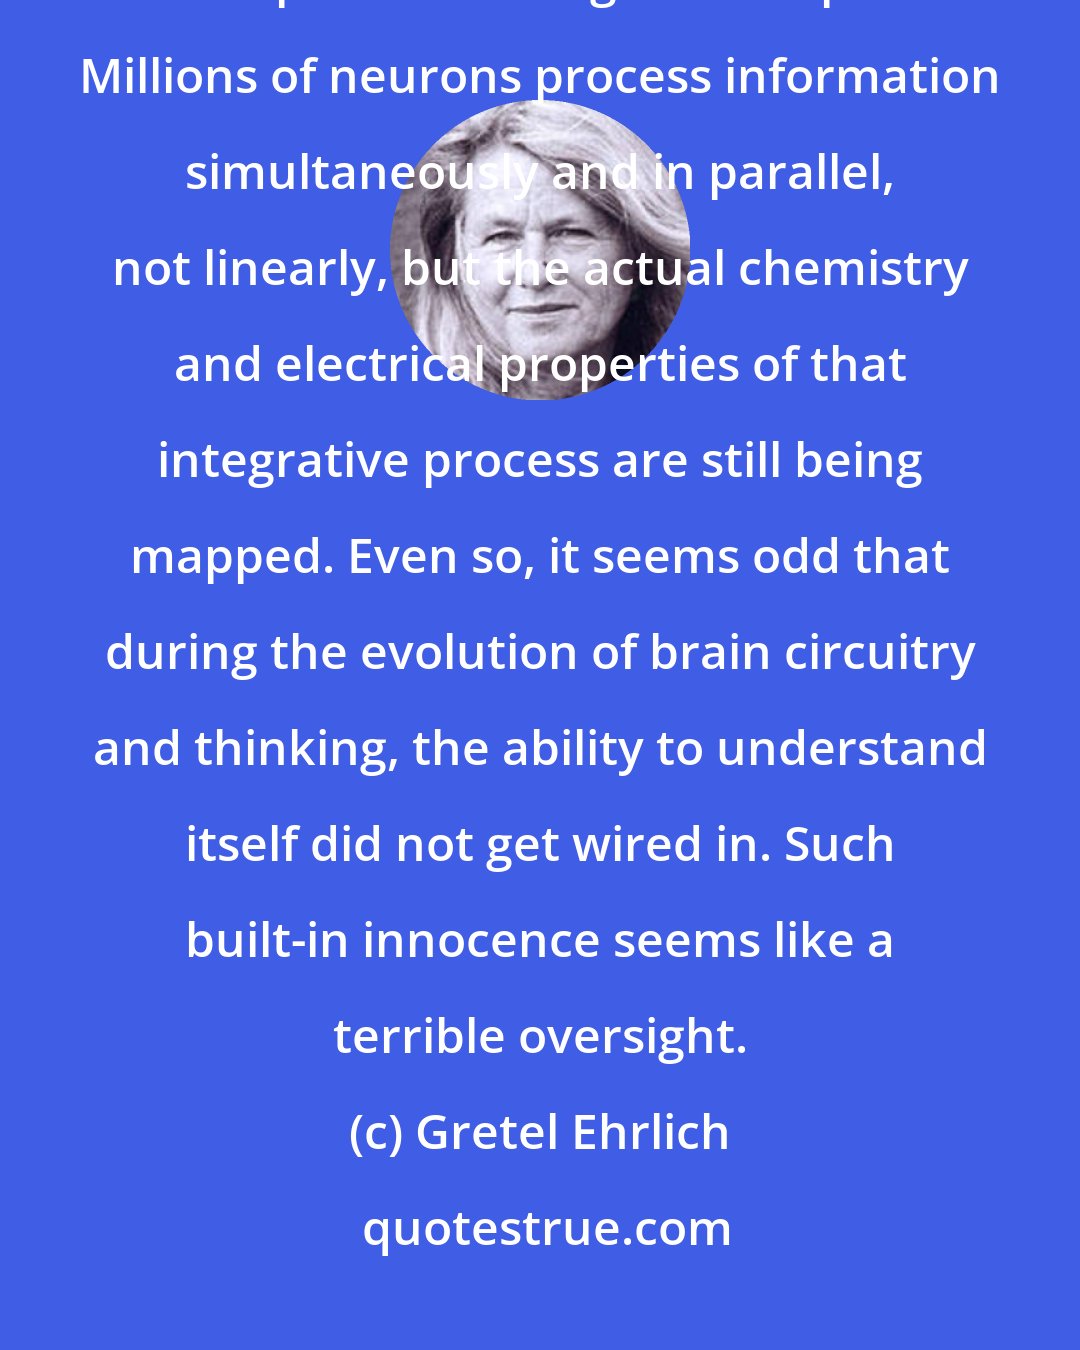 Gretel Ehrlich: All that's known is this: there is no central processor, no single computer. Nothing that simple. Millions of neurons process information simultaneously and in parallel, not linearly, but the actual chemistry and electrical properties of that integrative process are still being mapped. Even so, it seems odd that during the evolution of brain circuitry and thinking, the ability to understand itself did not get wired in. Such built-in innocence seems like a terrible oversight.